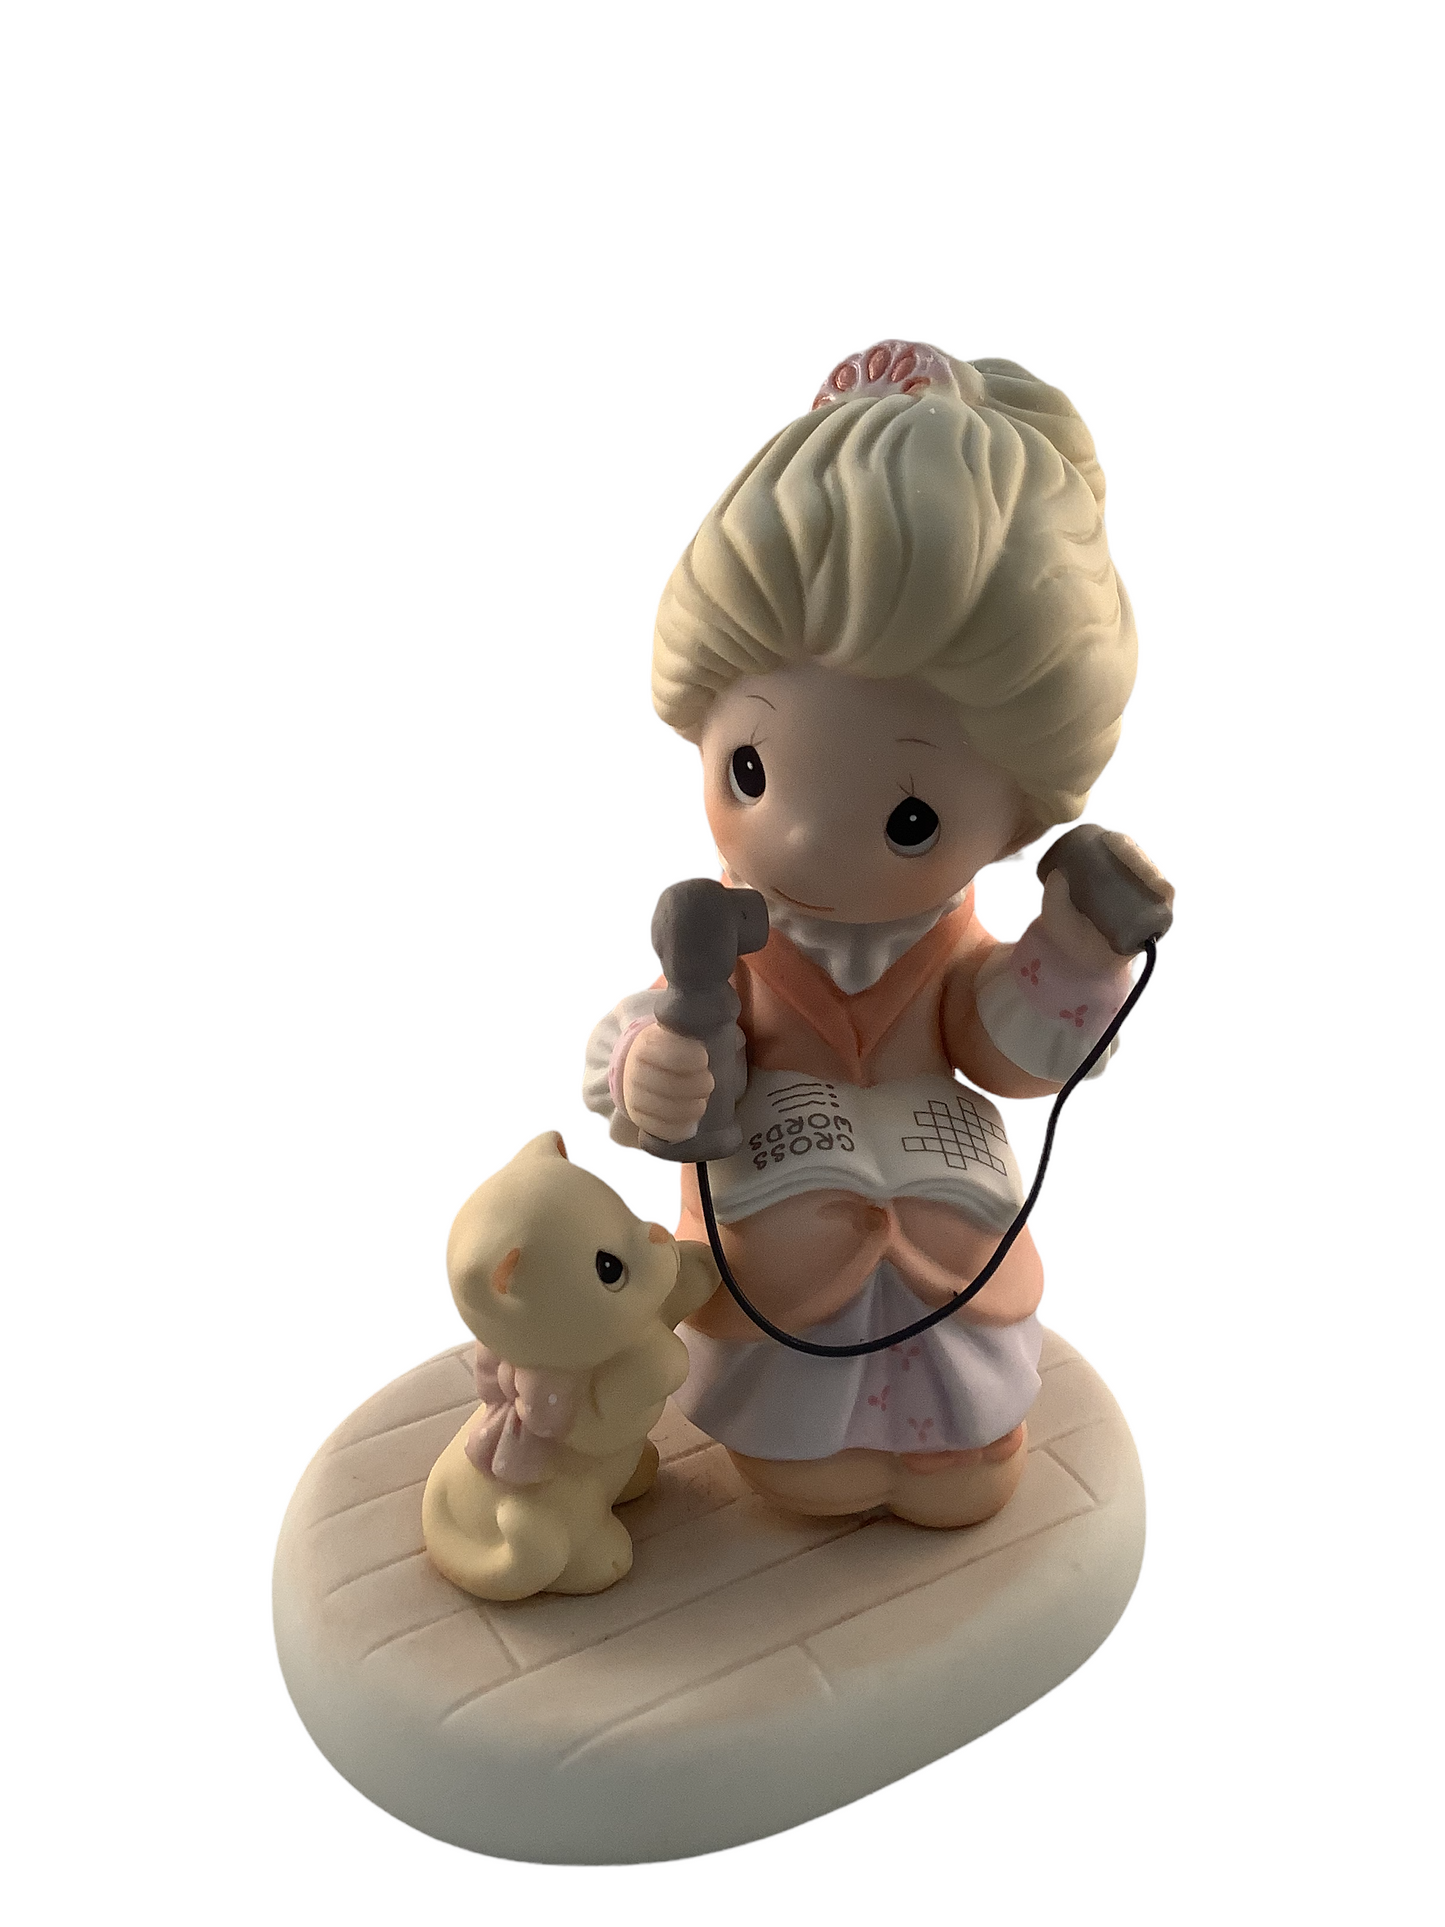 Just An Old Fashioned Hello - Precious Moment Figurine